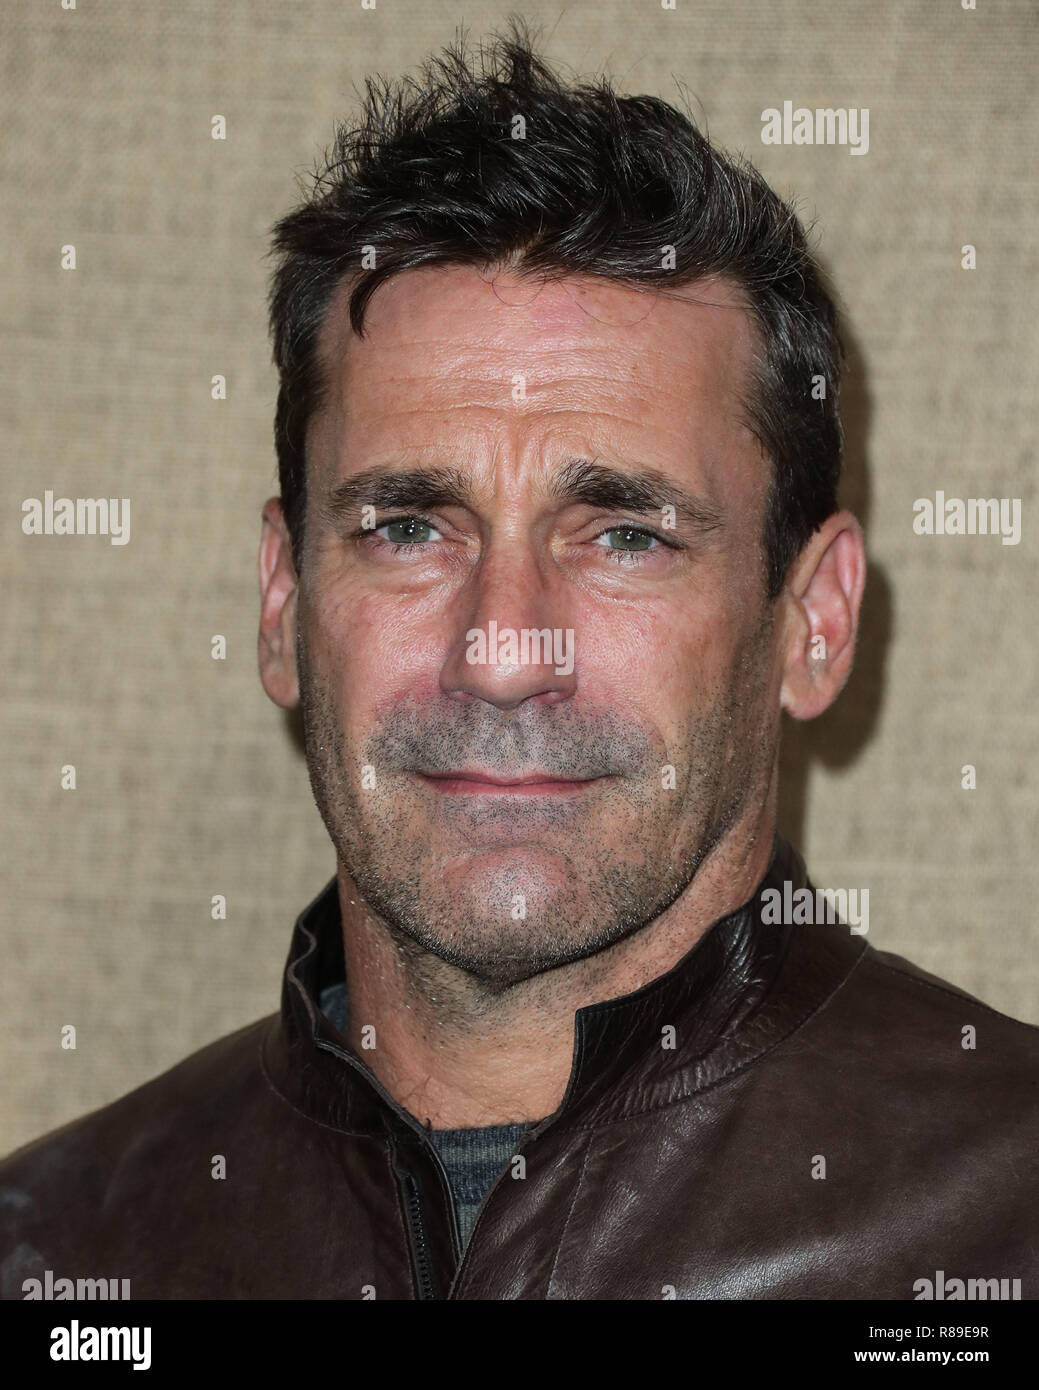 HOLLYWOOD, LOS ANGELES, CA, USA - OCTOBER 10: Jon Hamm at the Los Angeles Premiere Of HBO Series 'Camping' held at Paramount Studios on October 10, 2018 in Hollywood, Los Angeles, California, United States. (Photo by Xavier Collin/Image Press Agency) Stock Photo